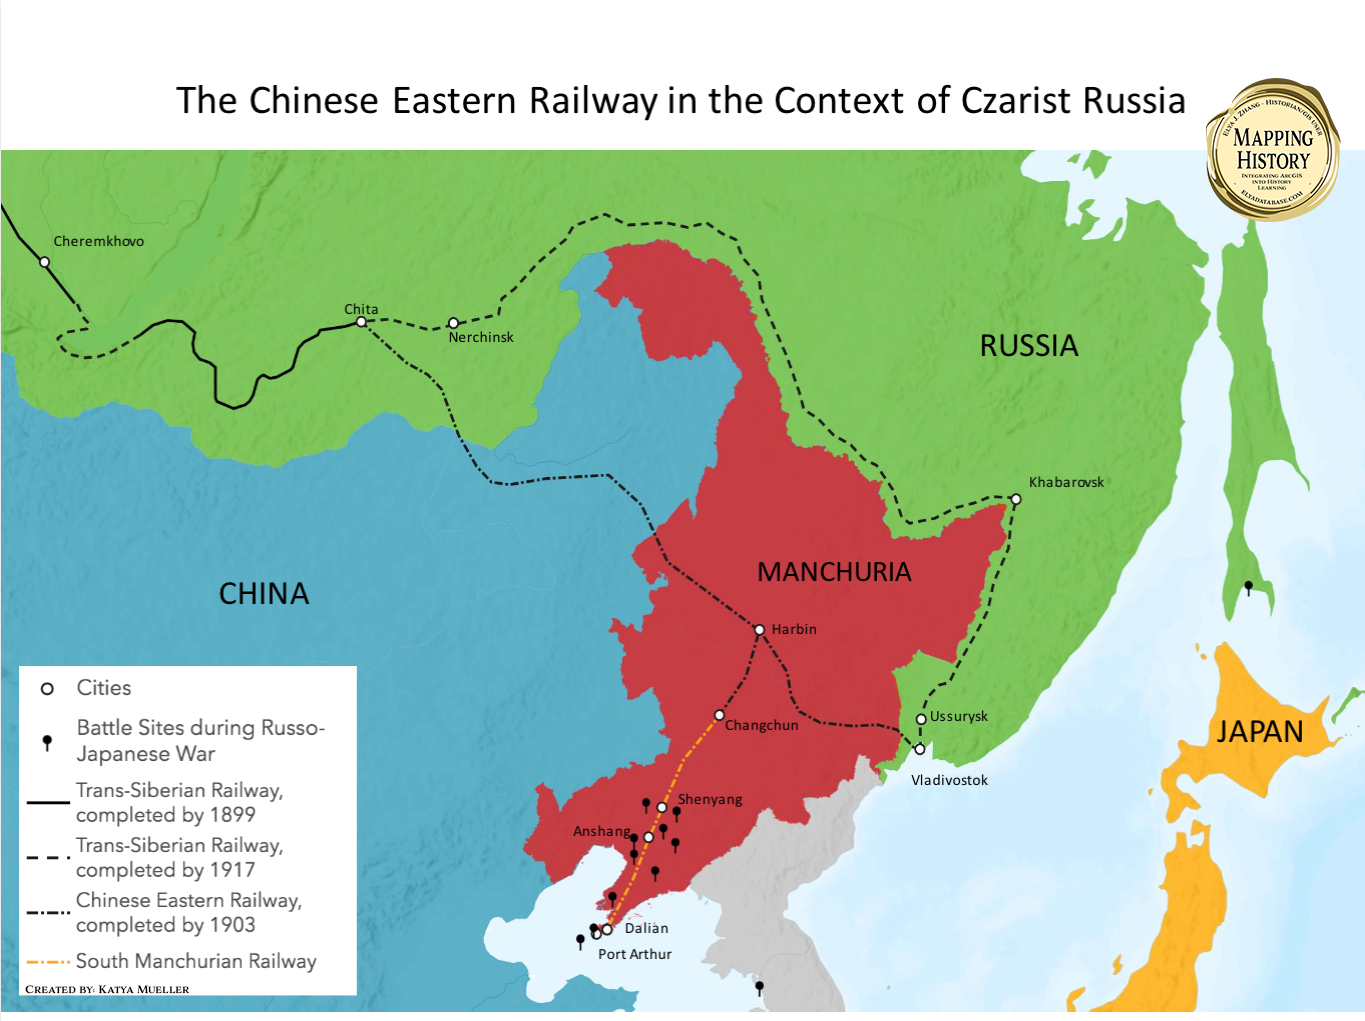 The Chinese Eastern Railway in the Context of Czarist Russia